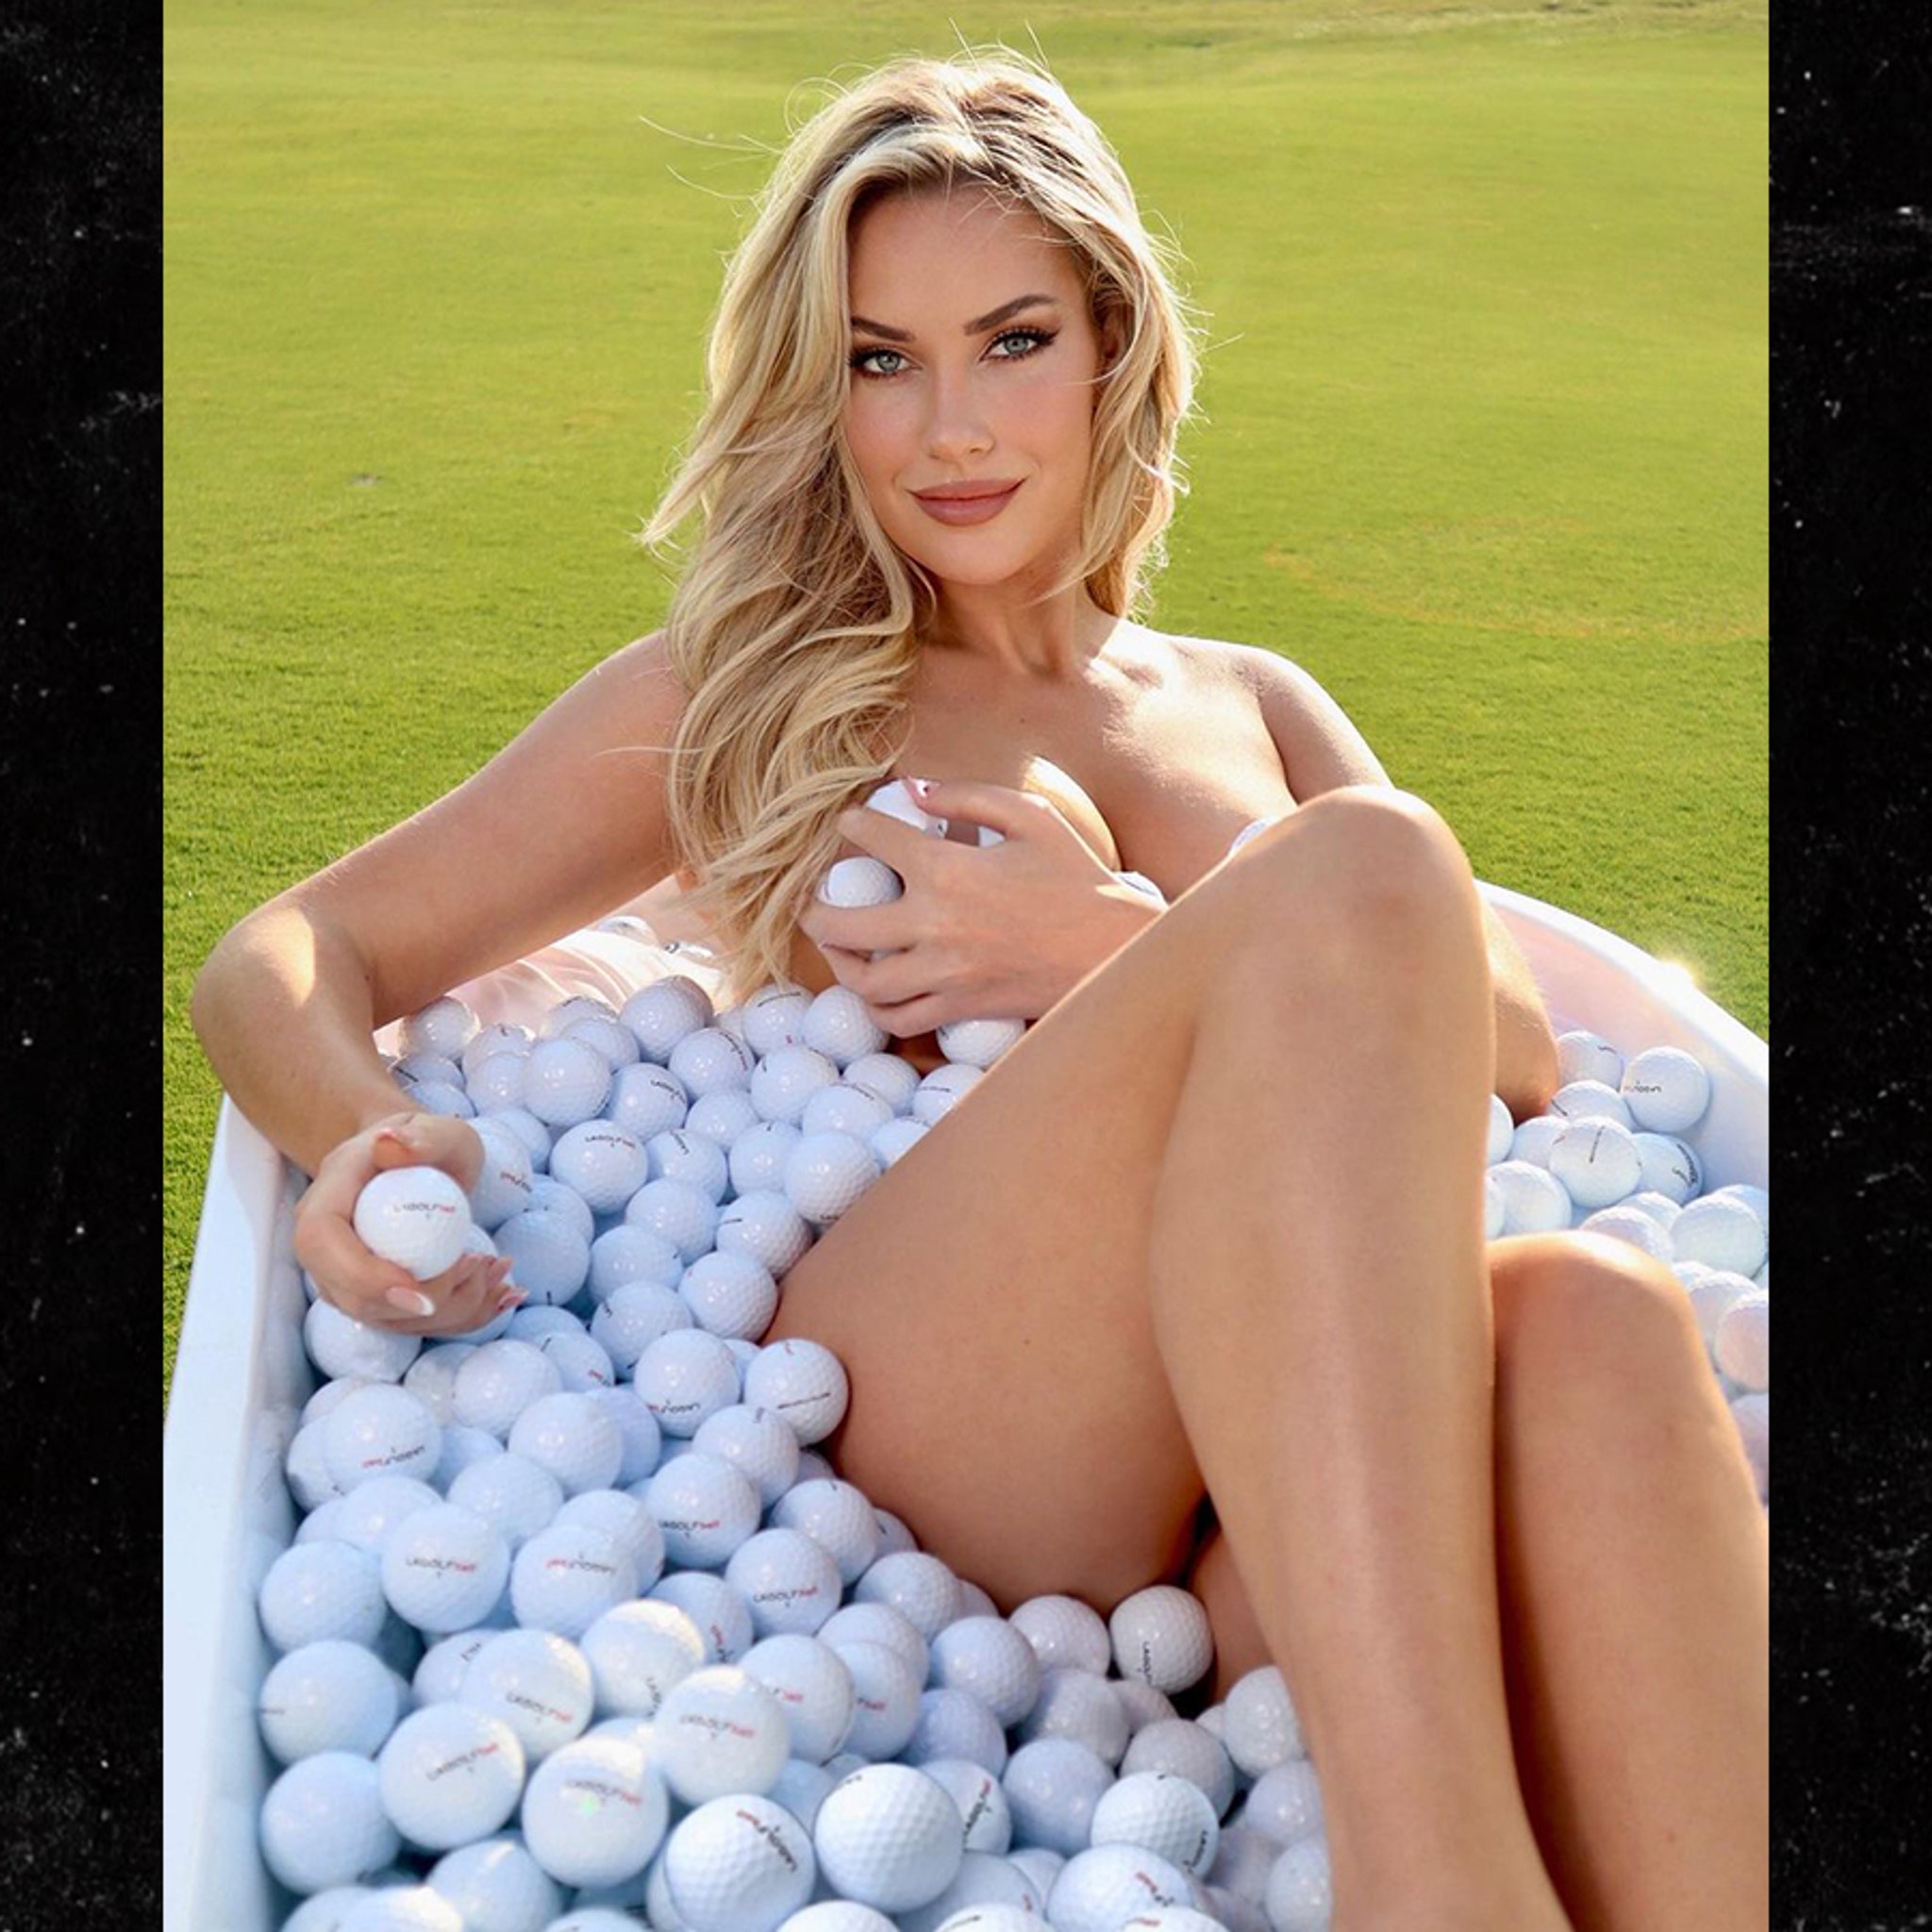 anthony noronha recommends paige spiranac leaked pics pic